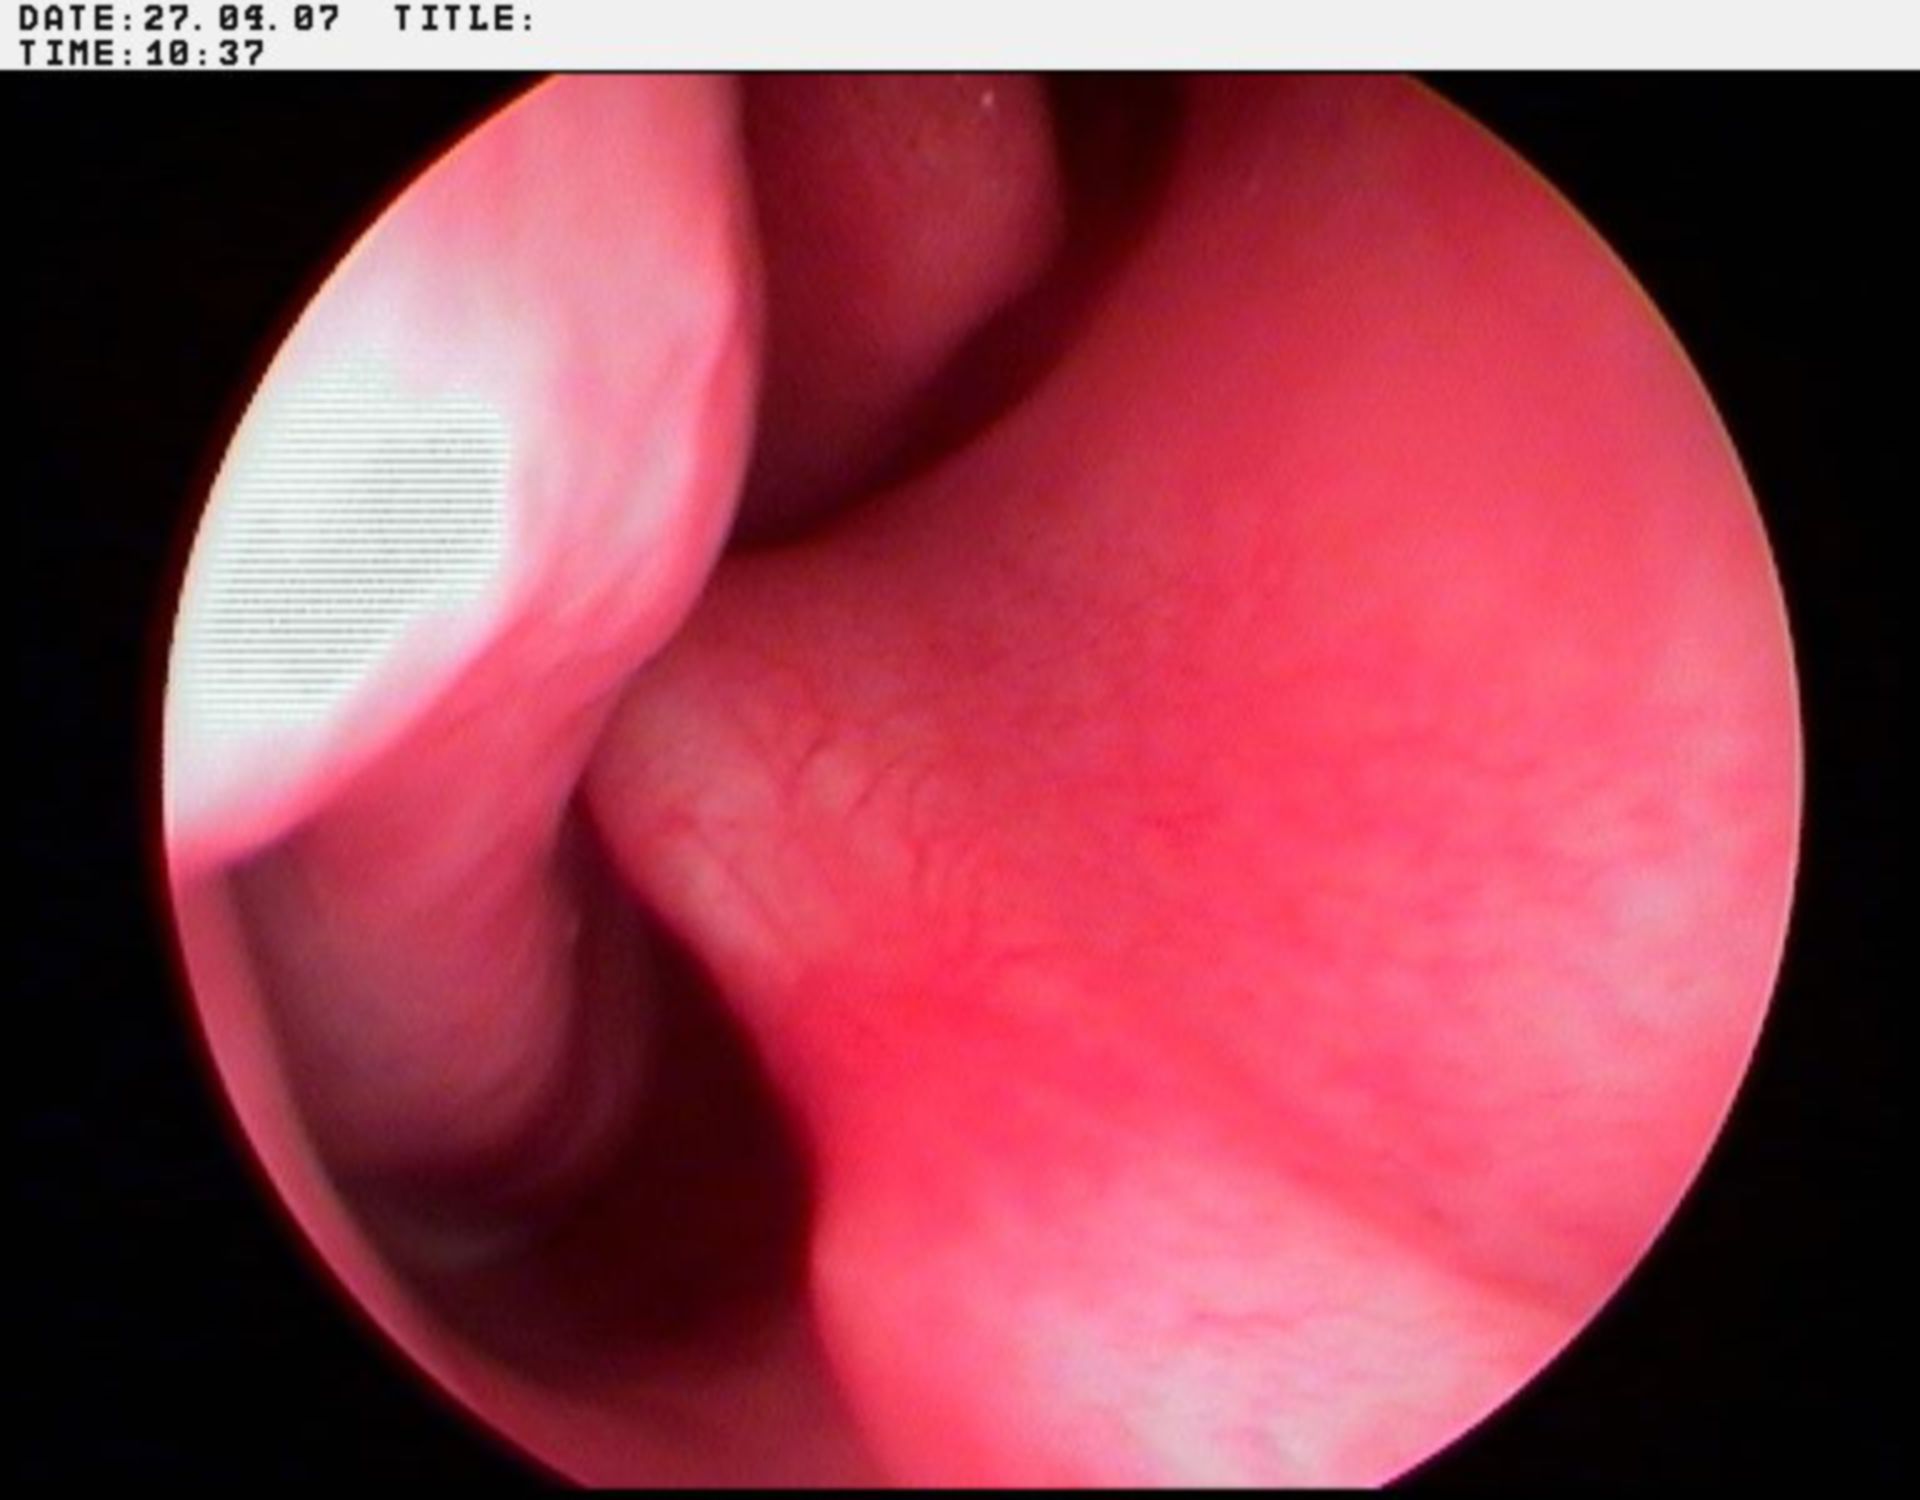 Curvature of the nasal septum to the right